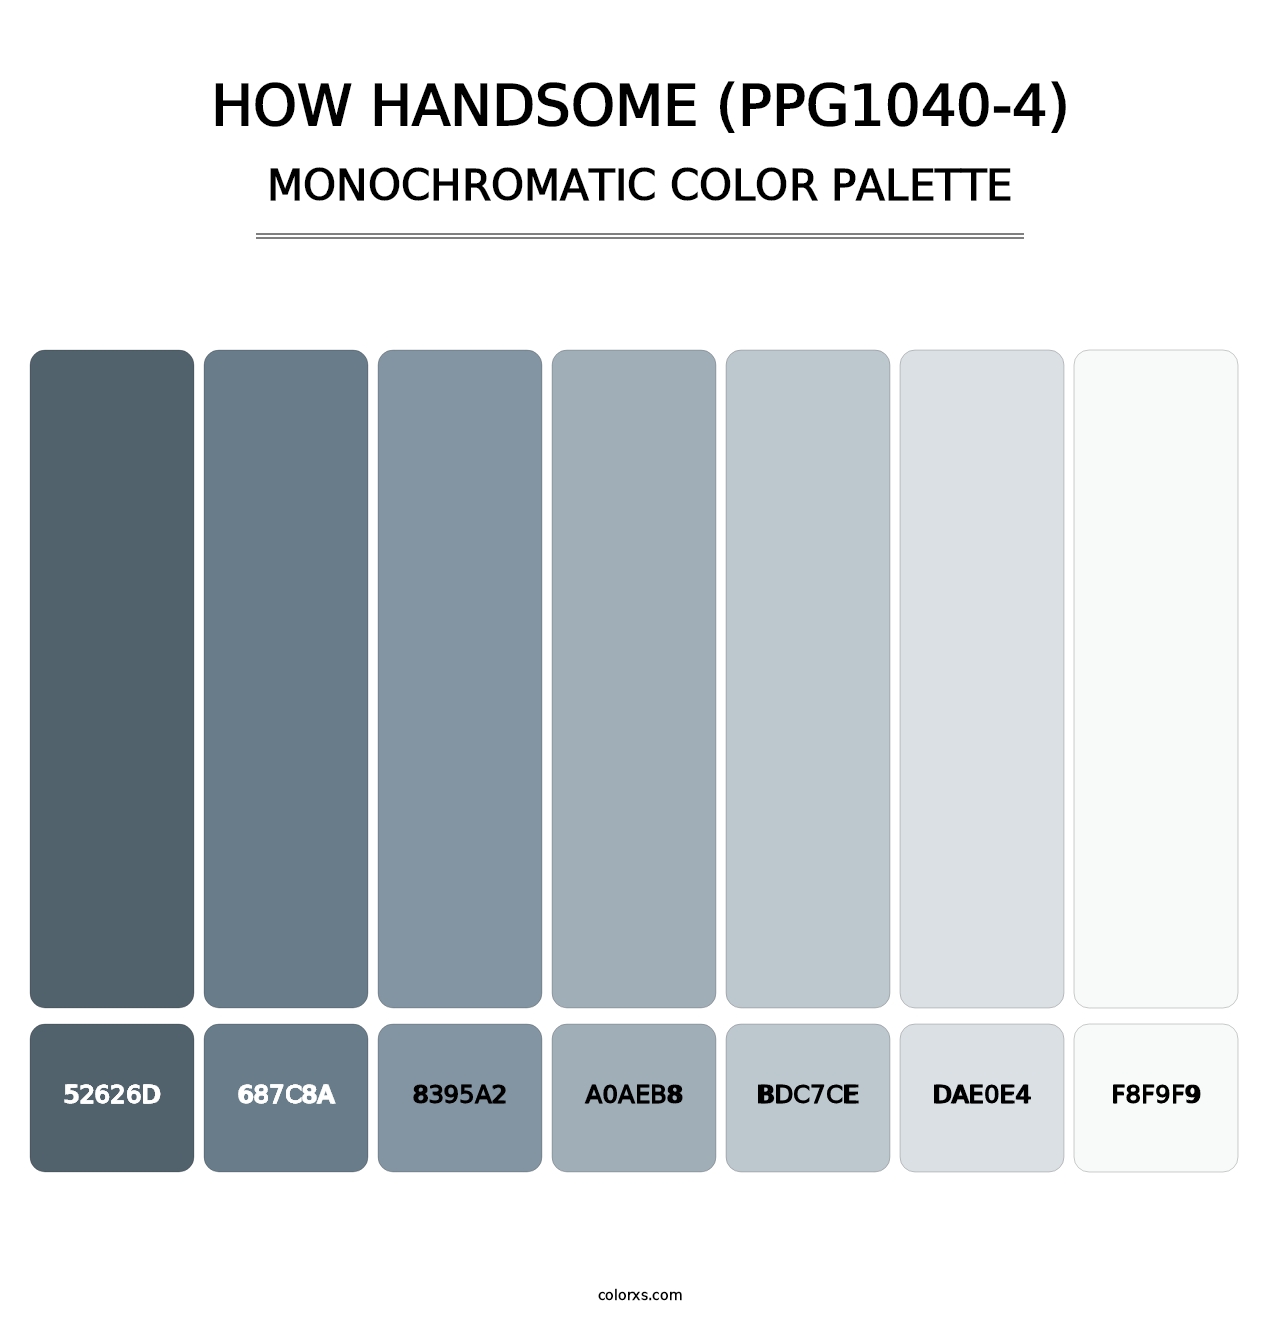 How Handsome (PPG1040-4) - Monochromatic Color Palette